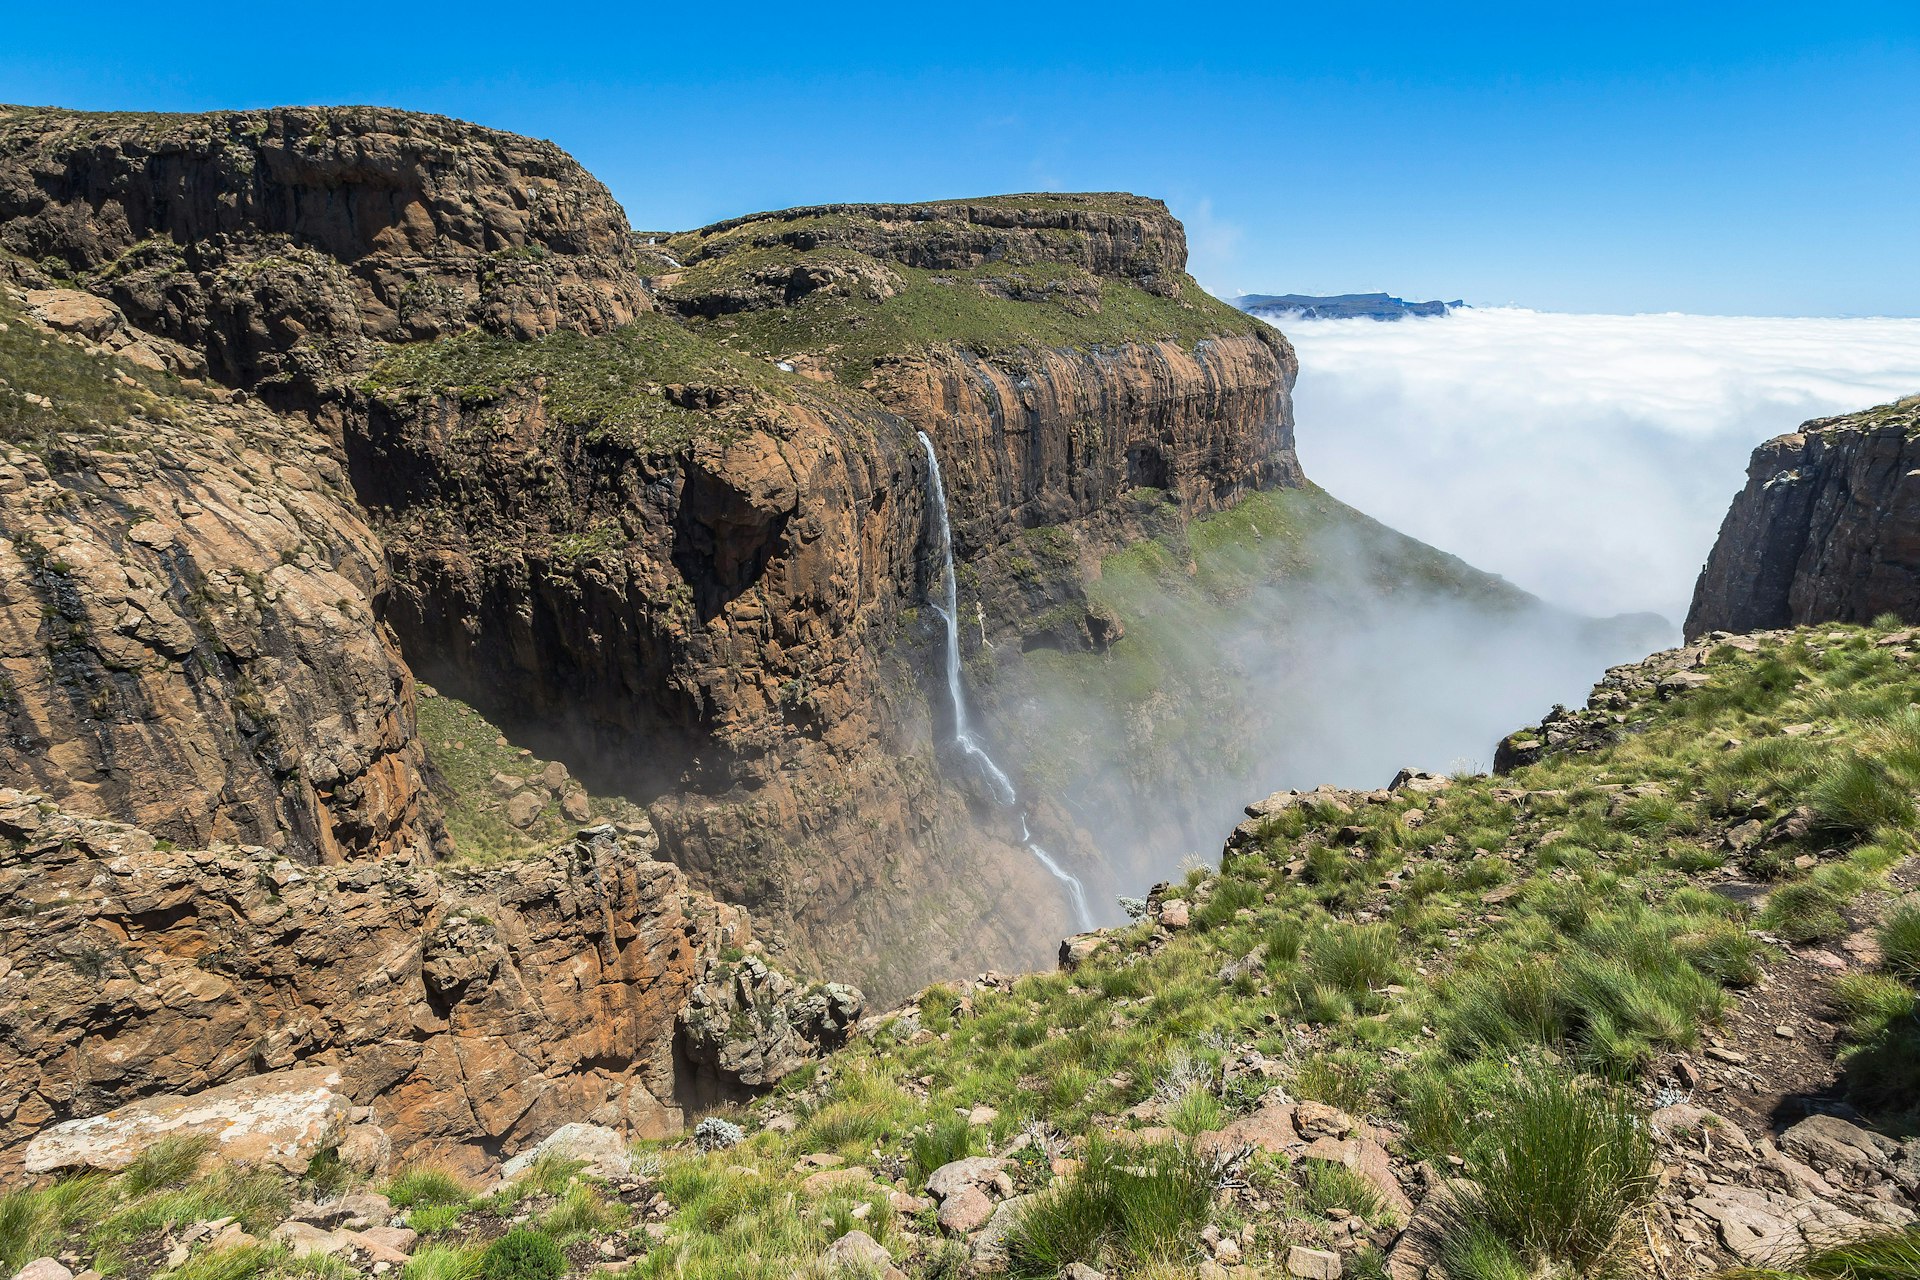 Tugela Falls as seen from the of Sentinel Hike, Drakensburg, South Africa